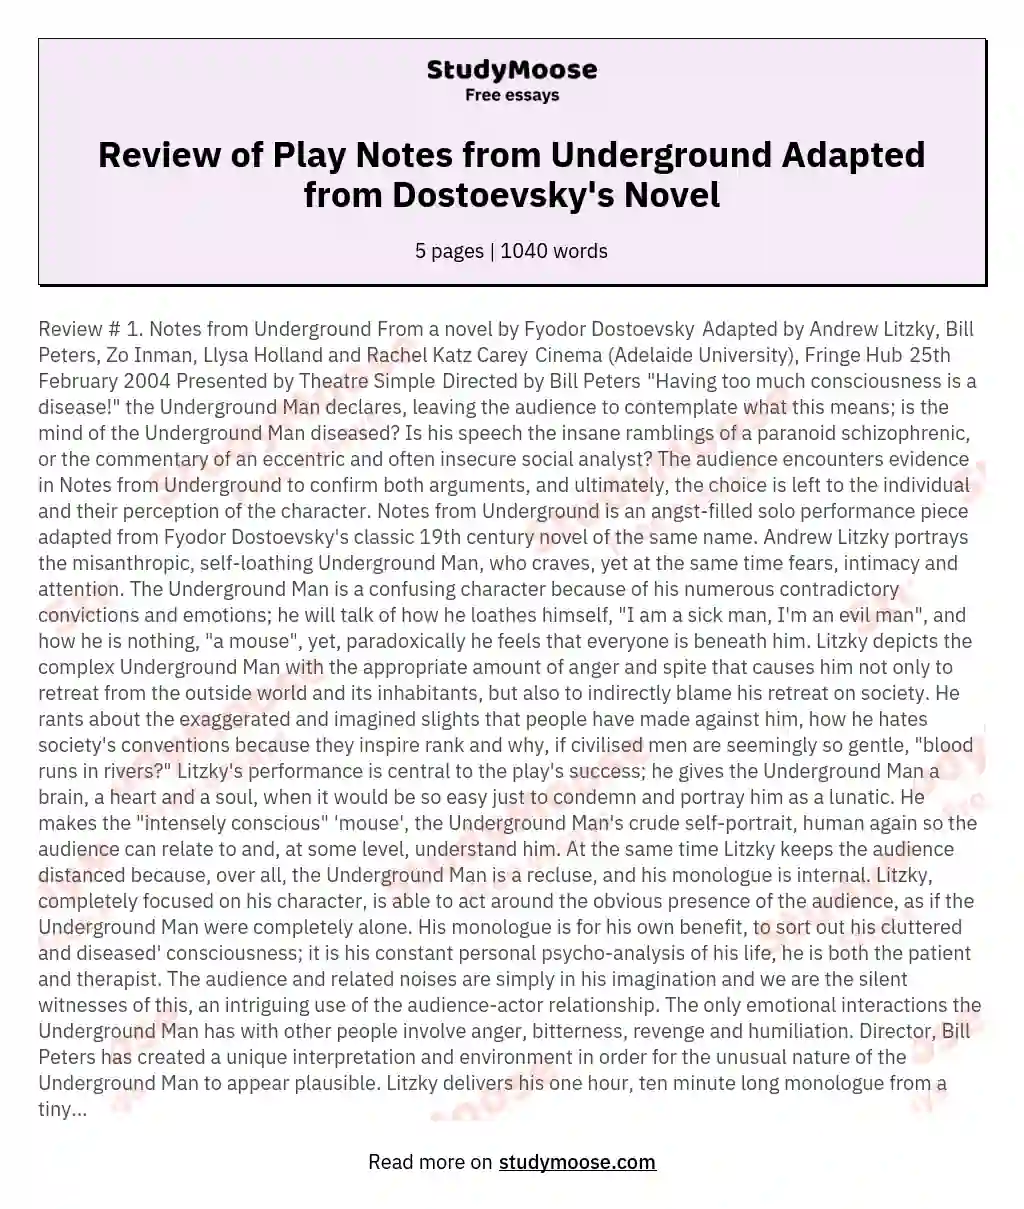 Review of Play Notes from Underground Adapted from Dostoevsky's Novel essay